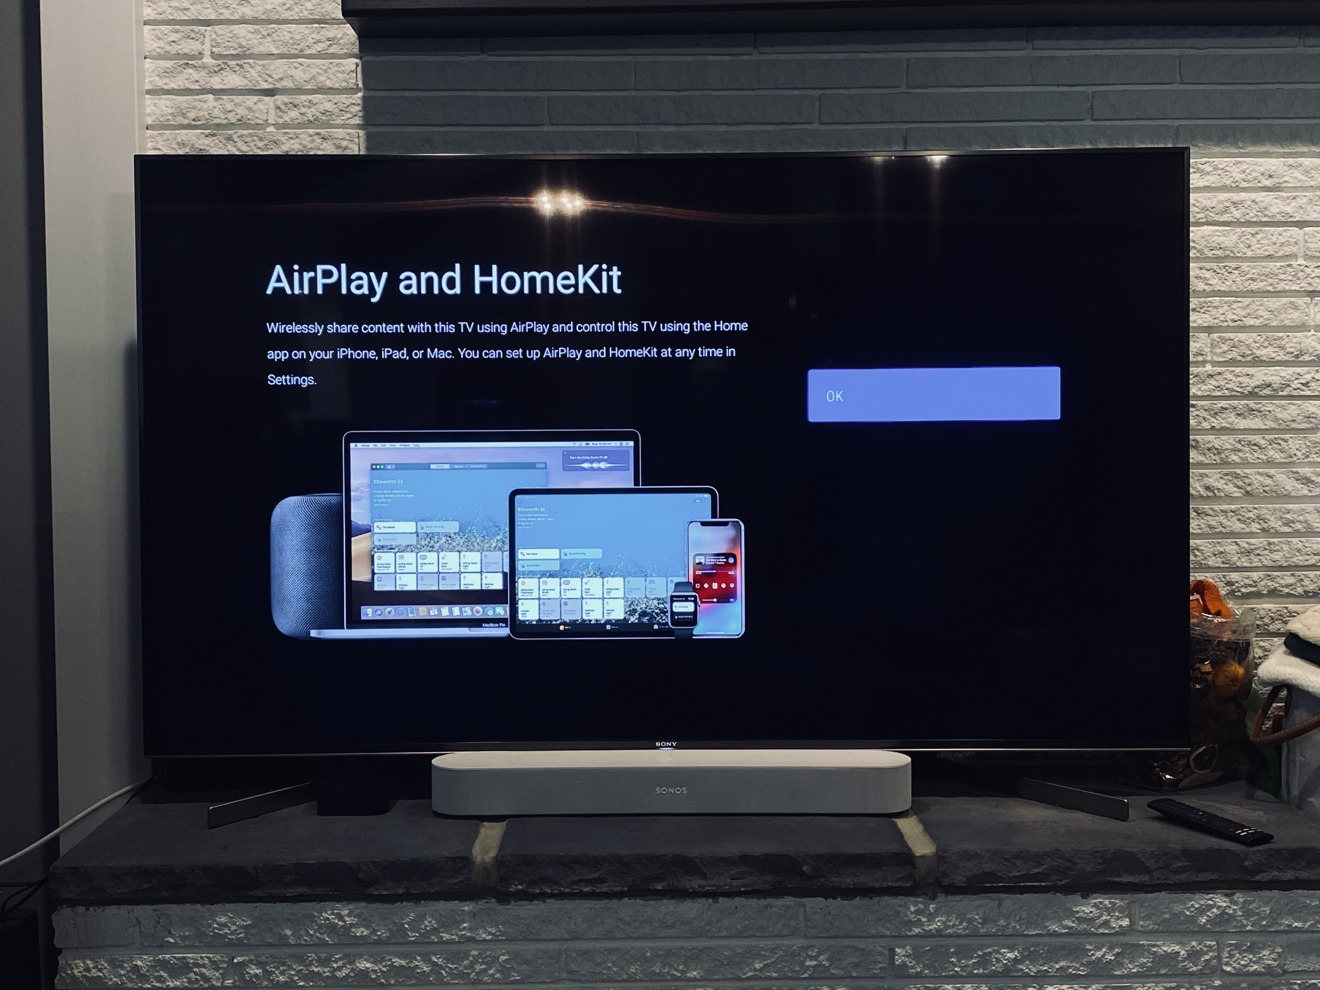 Hot And Airplay 2 On Sony Smart Tvs, Can I Screen Mirror Iphone To Sony Tv